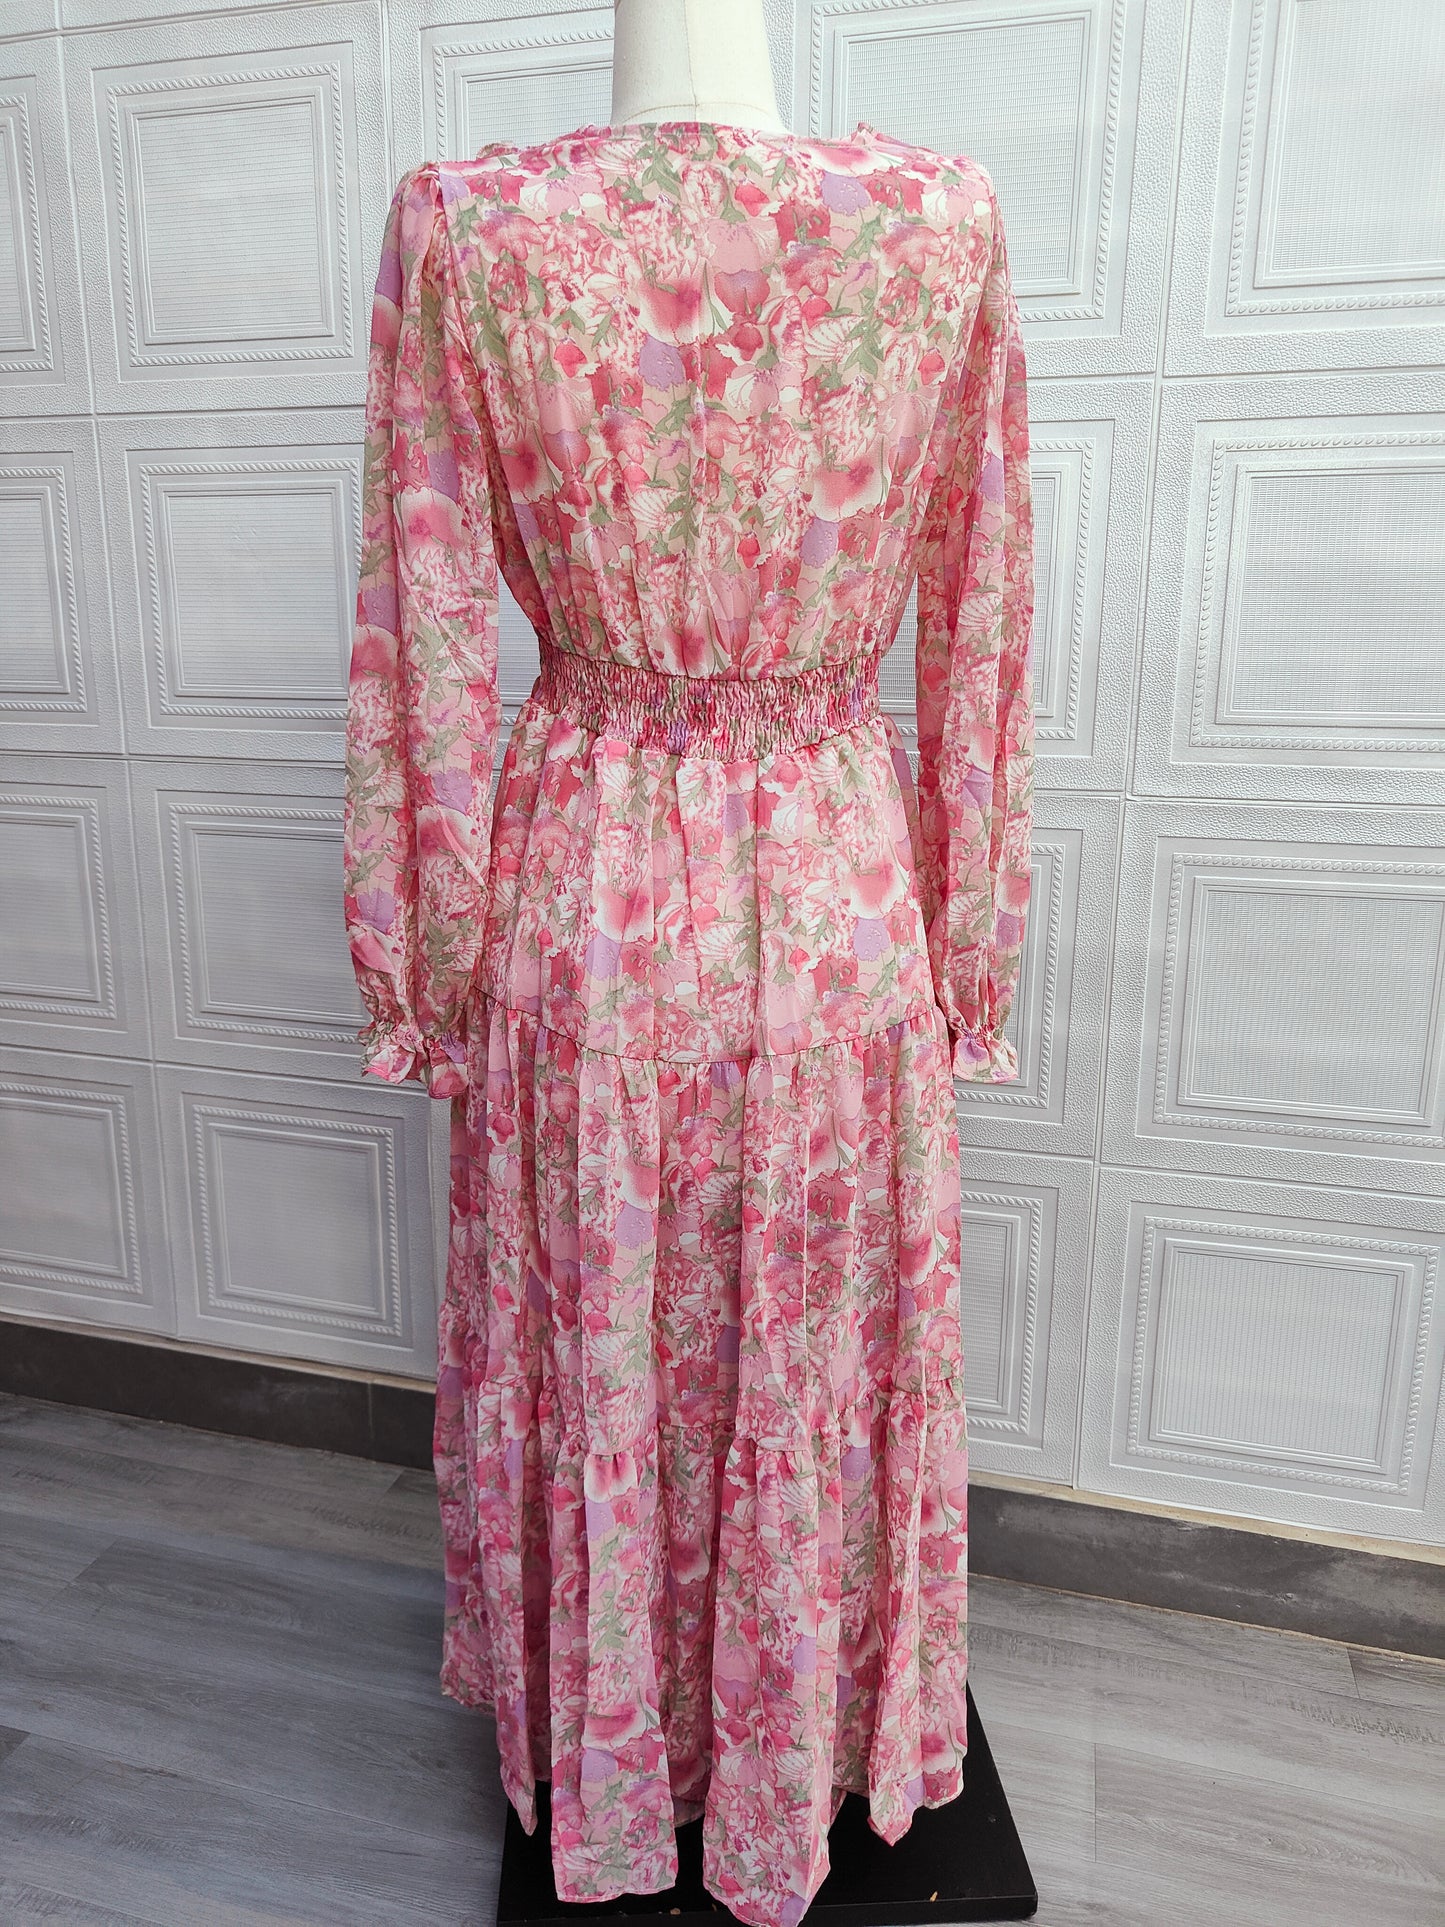 Make a statement in the new Floral Summer Dress by Hikmah Boutique. This Summer Dress features a feminine abstract floral print, puff sleeves with elasticated cuffs, and swish ready voluminous skirt. Perfect for cocktail events or any evening soirees! This party dress is made from the softest yet premium fabric. 